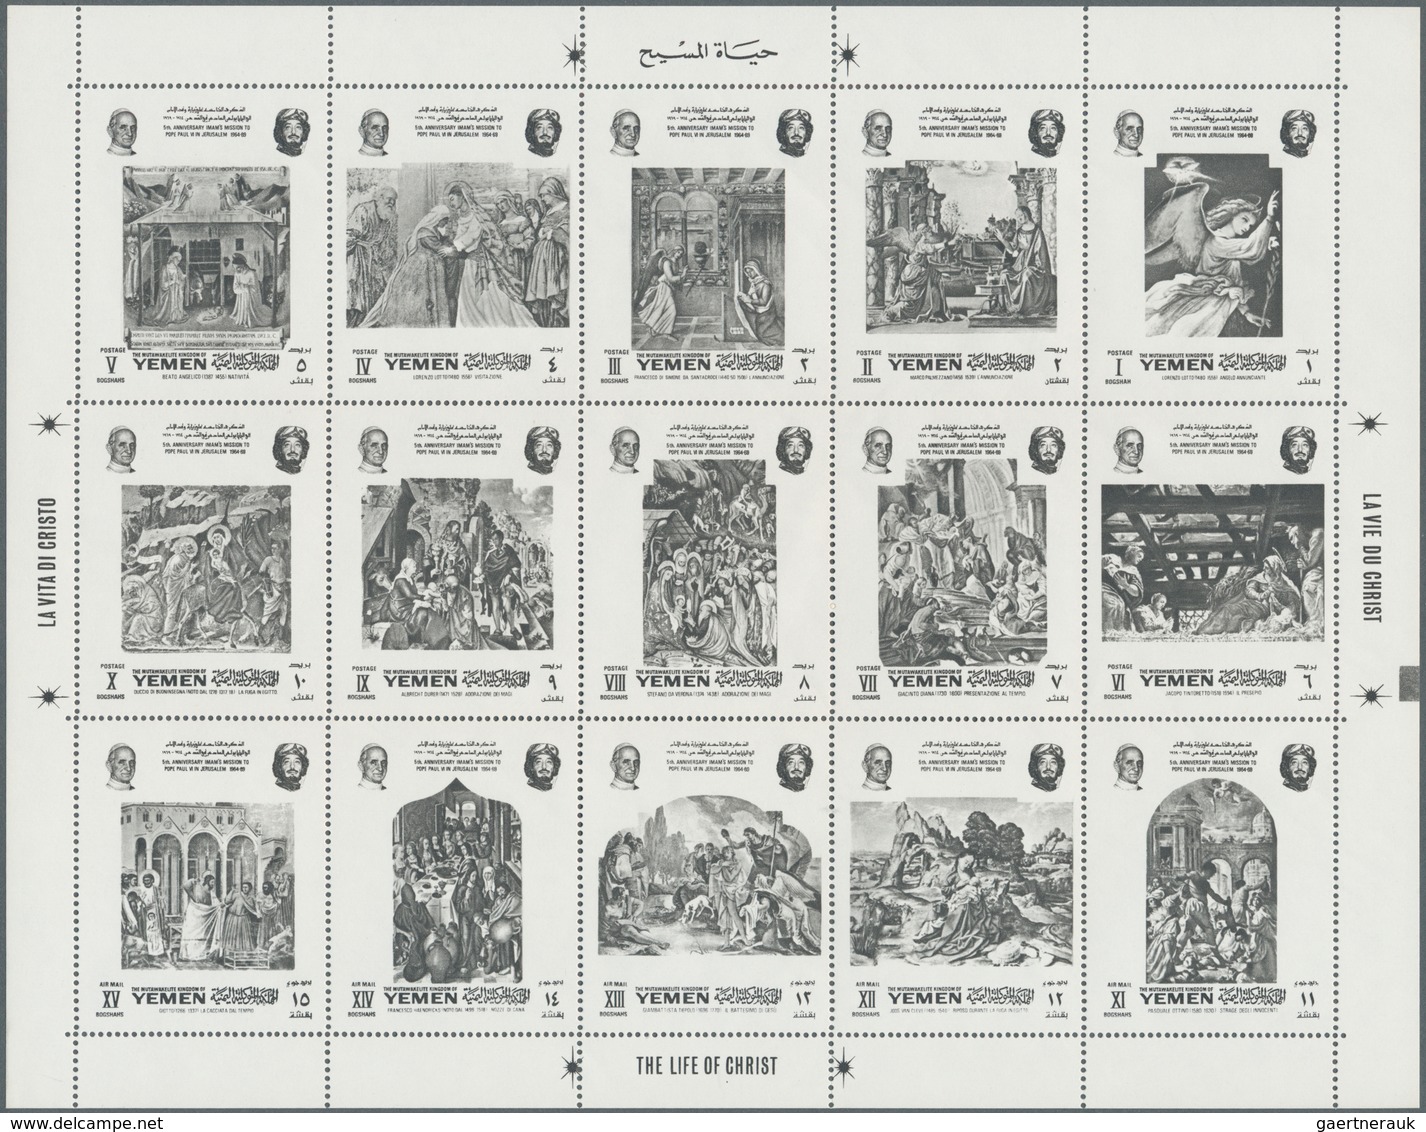 Jemen - Königreich: 1969, Paintings from the life of Christ (perf. se-tenant sheet of 15 stamps): ei